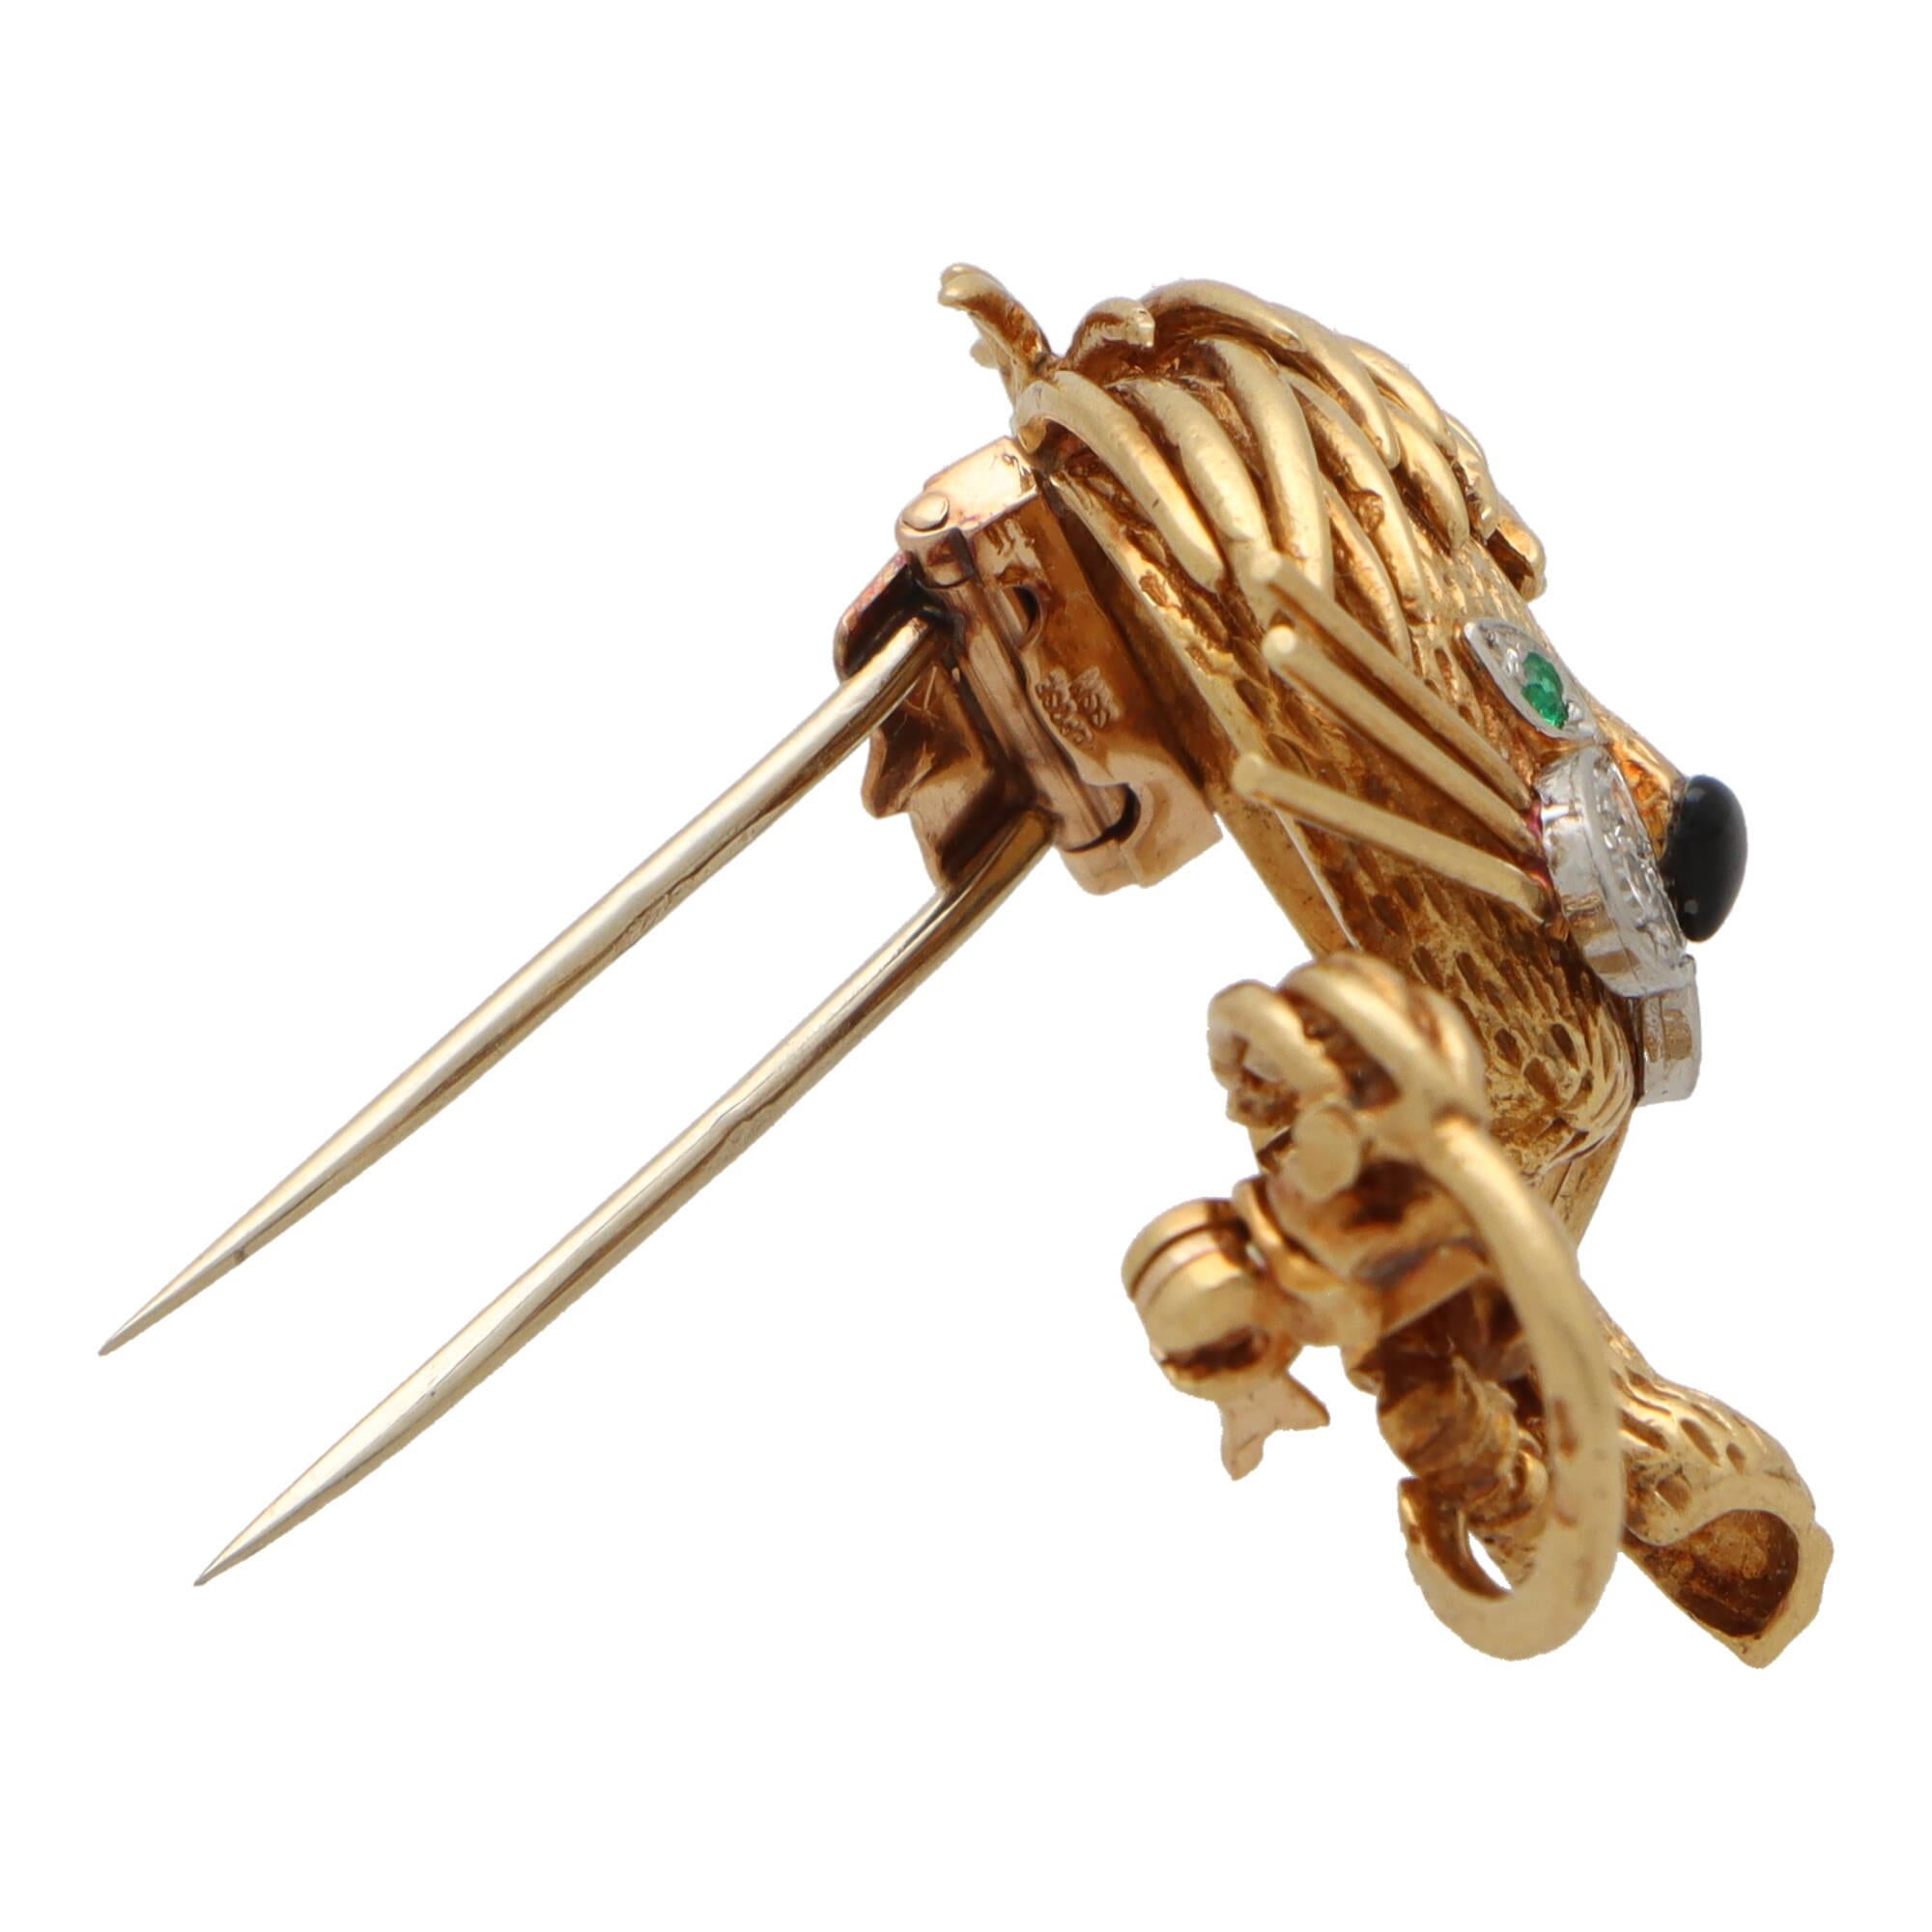 A beautiful vintage Van Cleef and Arpels 1970’s lion brooch in 18k yellow gold and platinum.

Known as the ‘Lion Ebouriffe’ brooch, the piece depicts a sitting lion, handmade in yellow gold and platinum. The lion has been beautifully handcrafted and